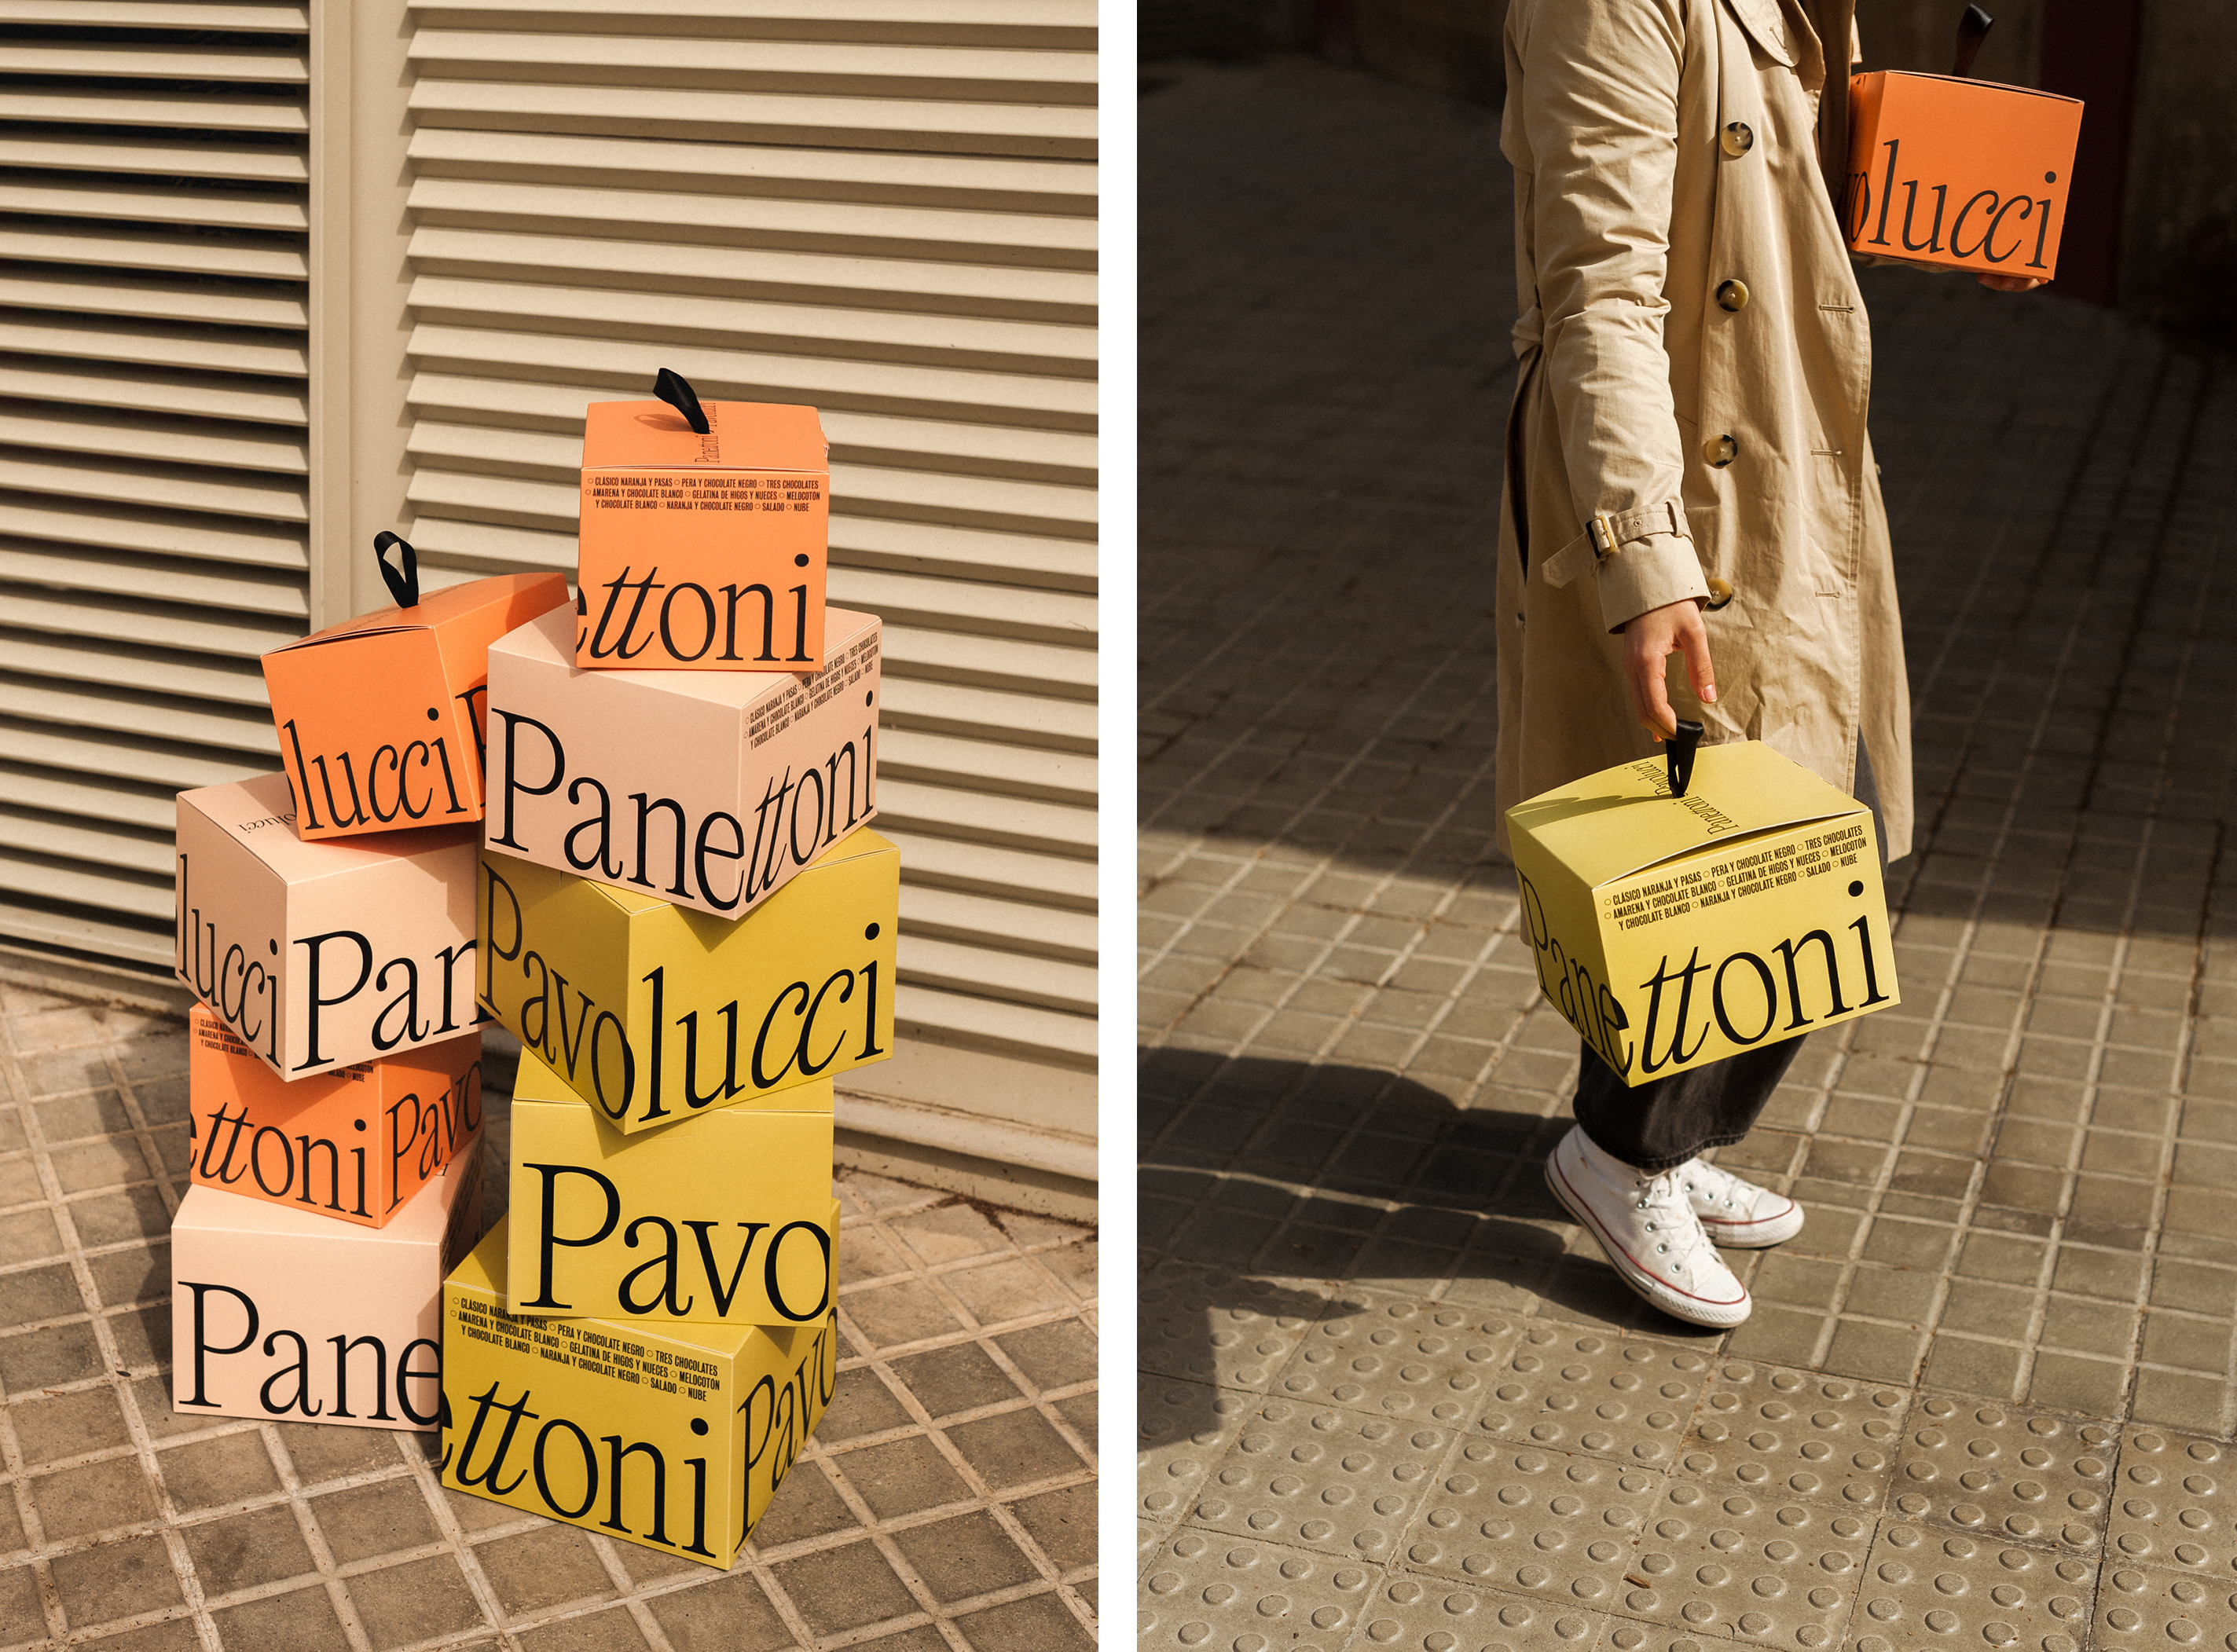 Brand identity, packaging and signage by Requena for Spanish panettone brand Panettoni Pavolucci